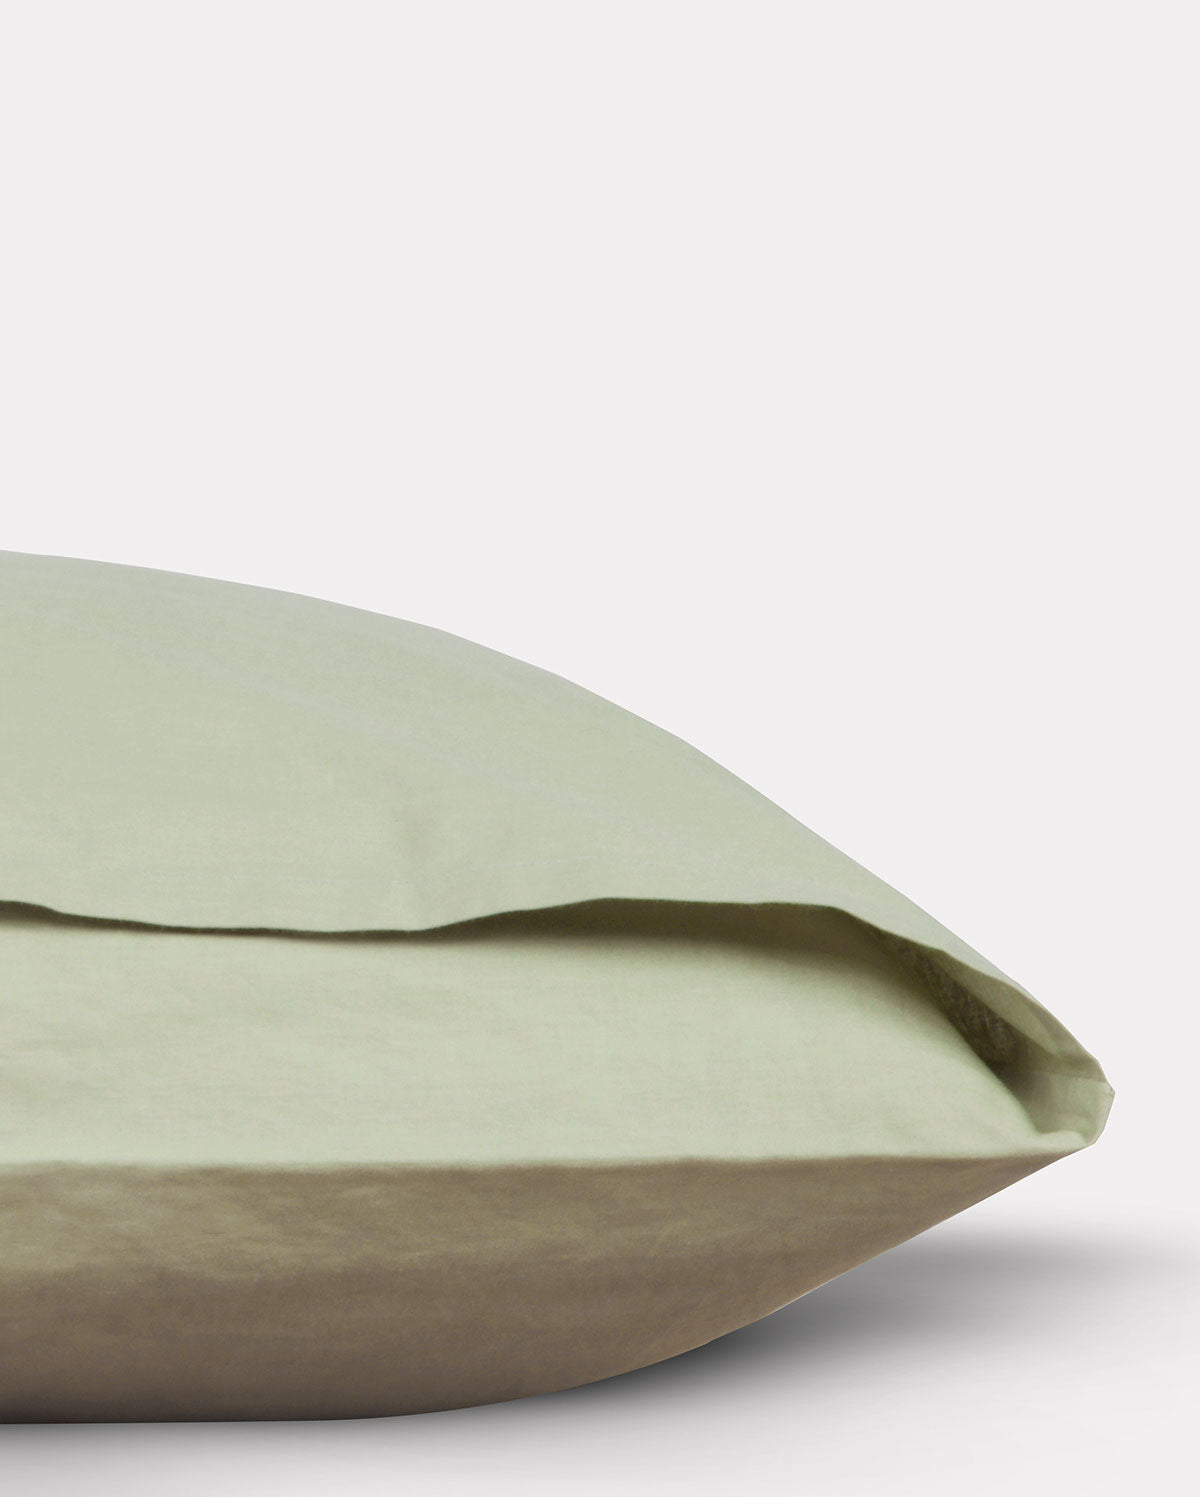 Classic Percale - Fitted Sheet Set -  Sage Green